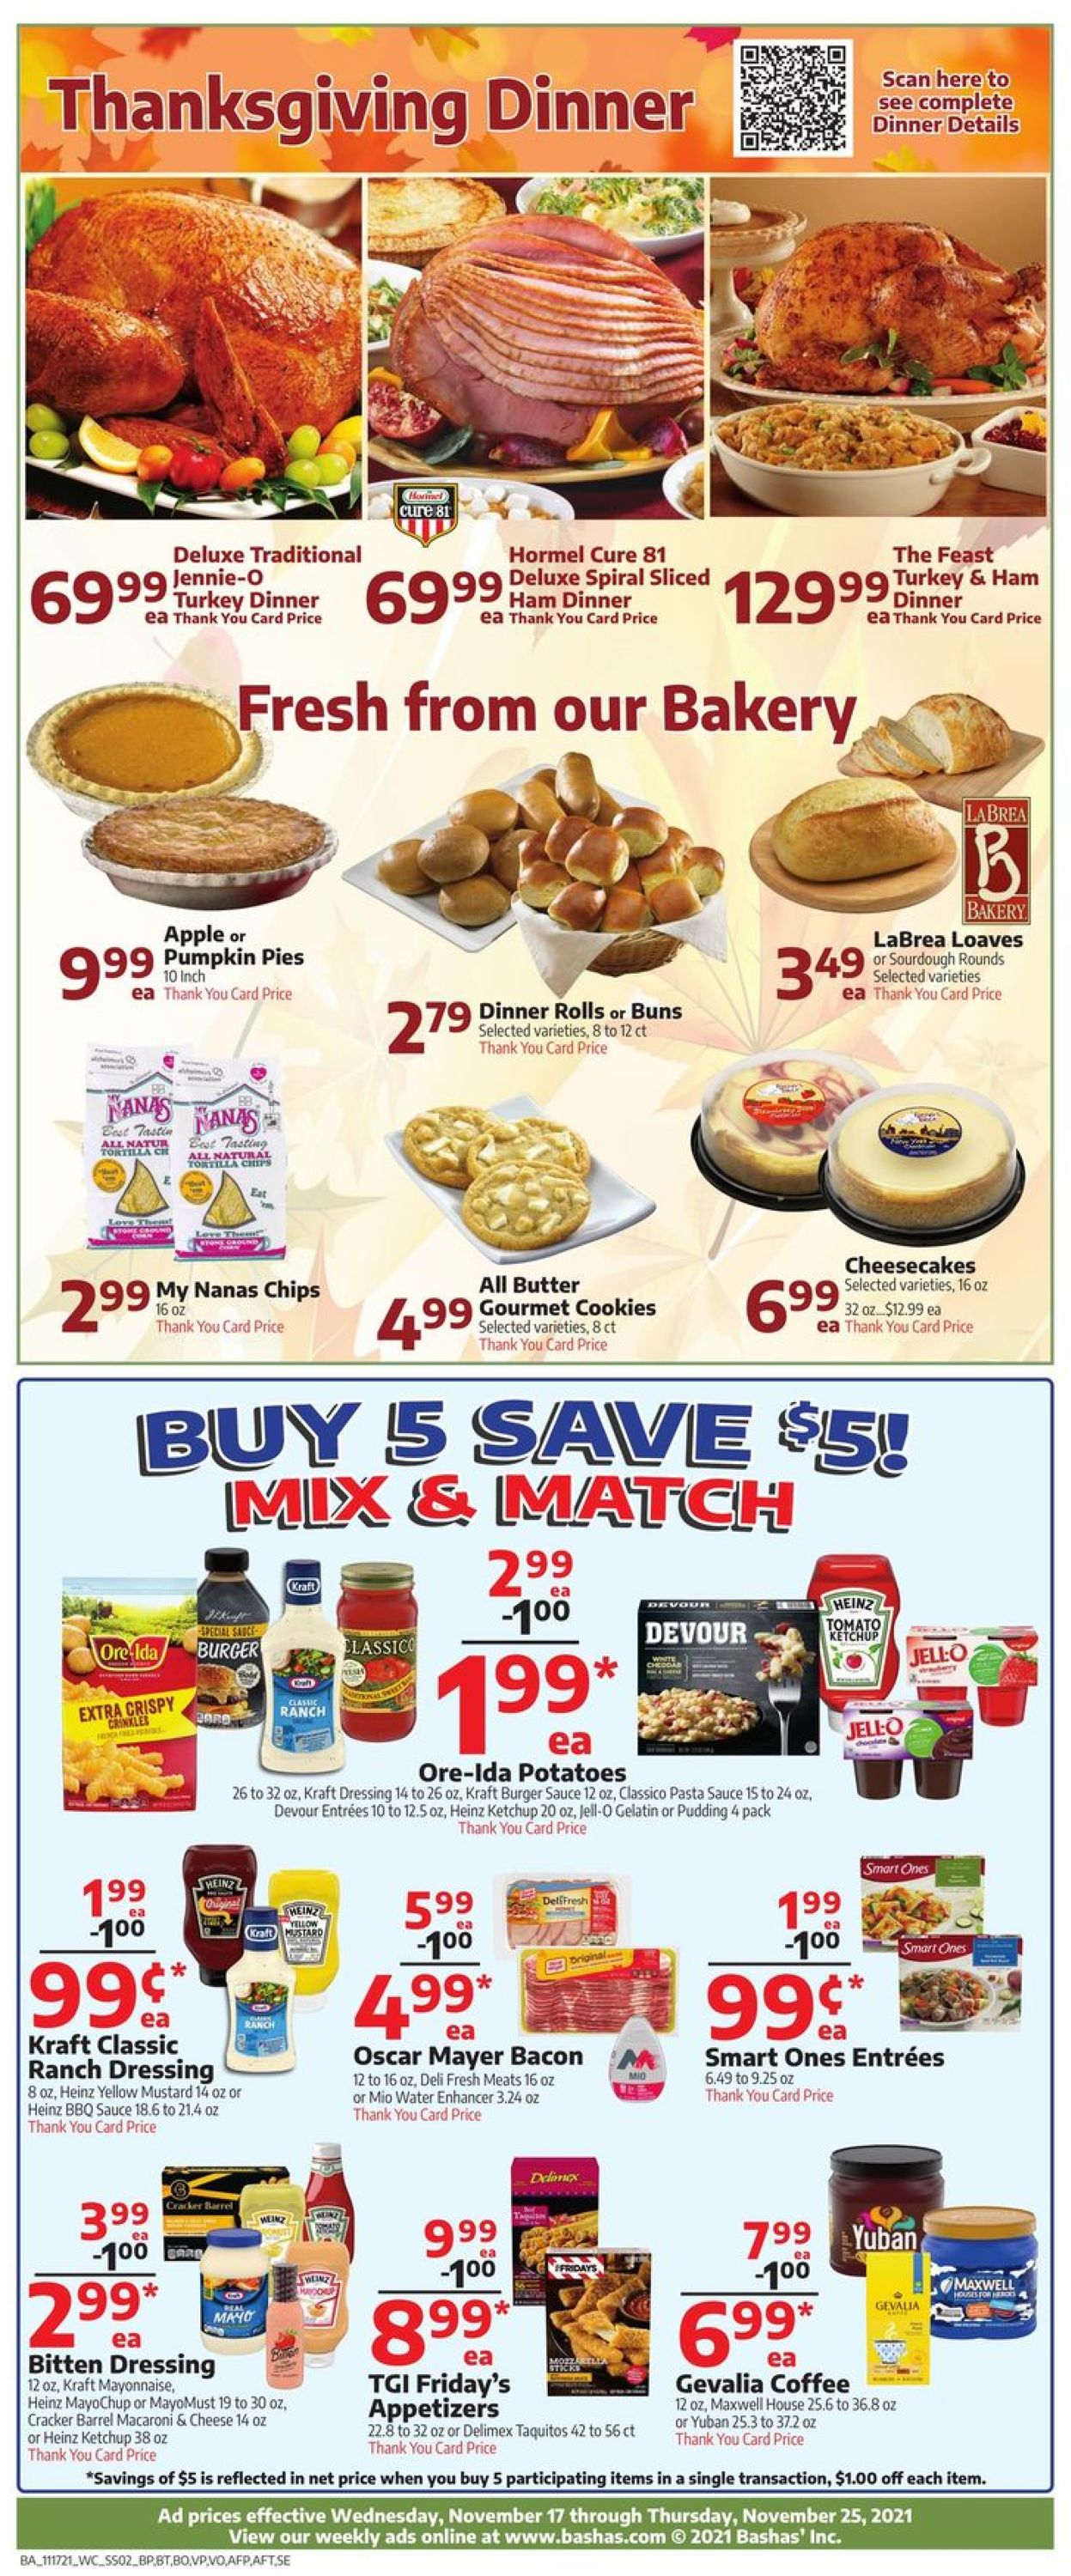 bashas thanksgiving 2021 current weekly ad 11 17 11 25 2021 7 frequent ads com